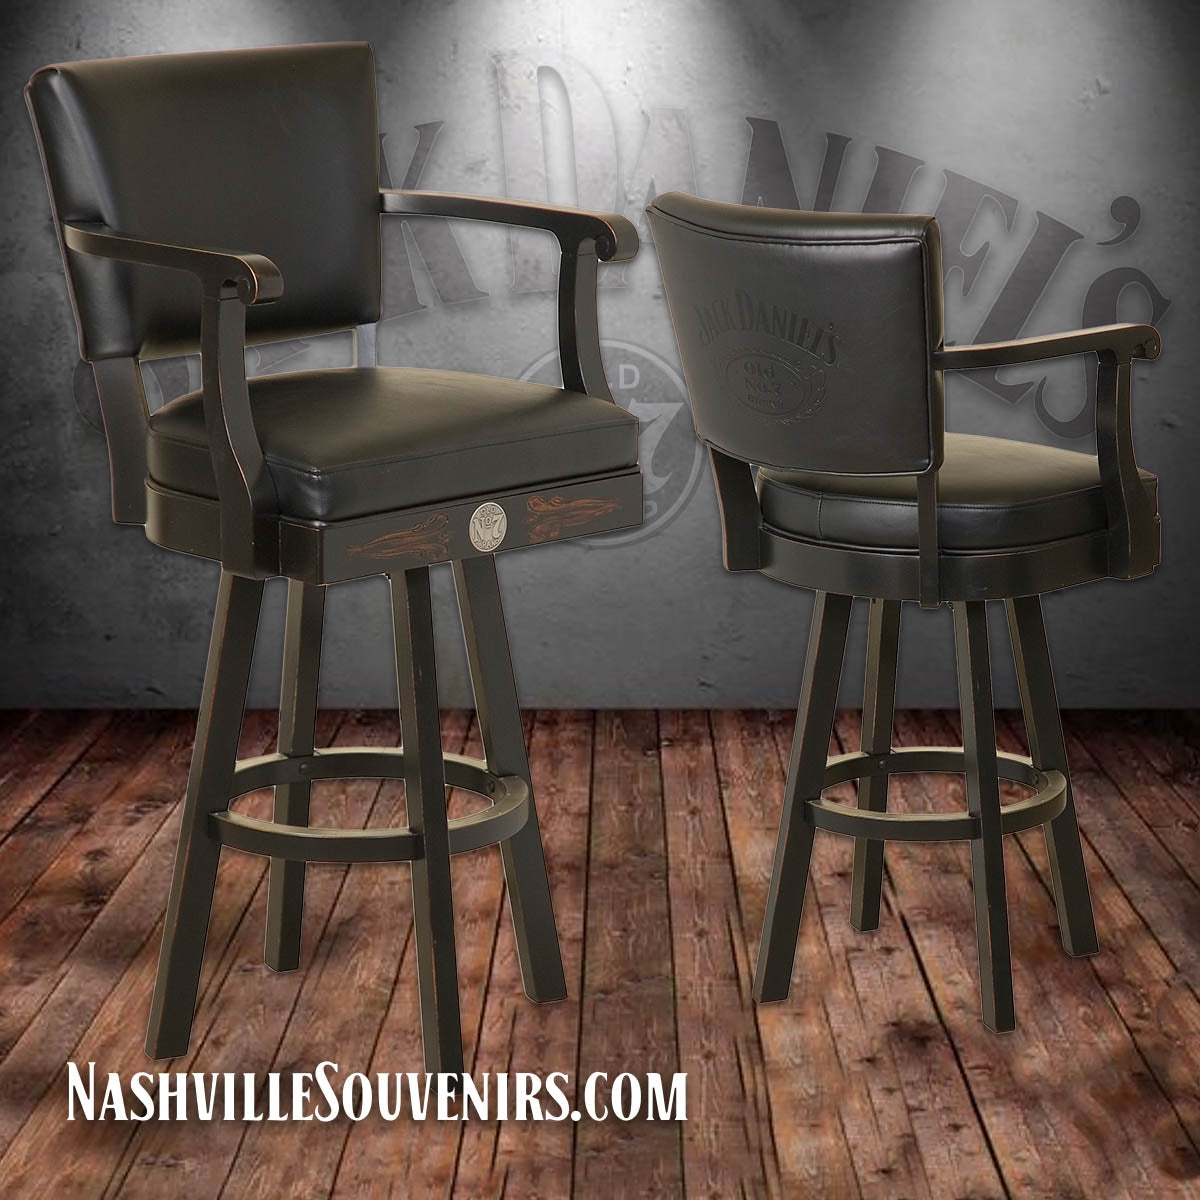 This licensed Jack Daniel's bar stool with backrest is a great place to park yourself while sipping your Tennessee whiskey.  The Jack Daniel's swivel bar stool is hand rubbed in a Tennessee charcoal finish that is sure to add some Jack Daniel's class to your home bar or rec room.